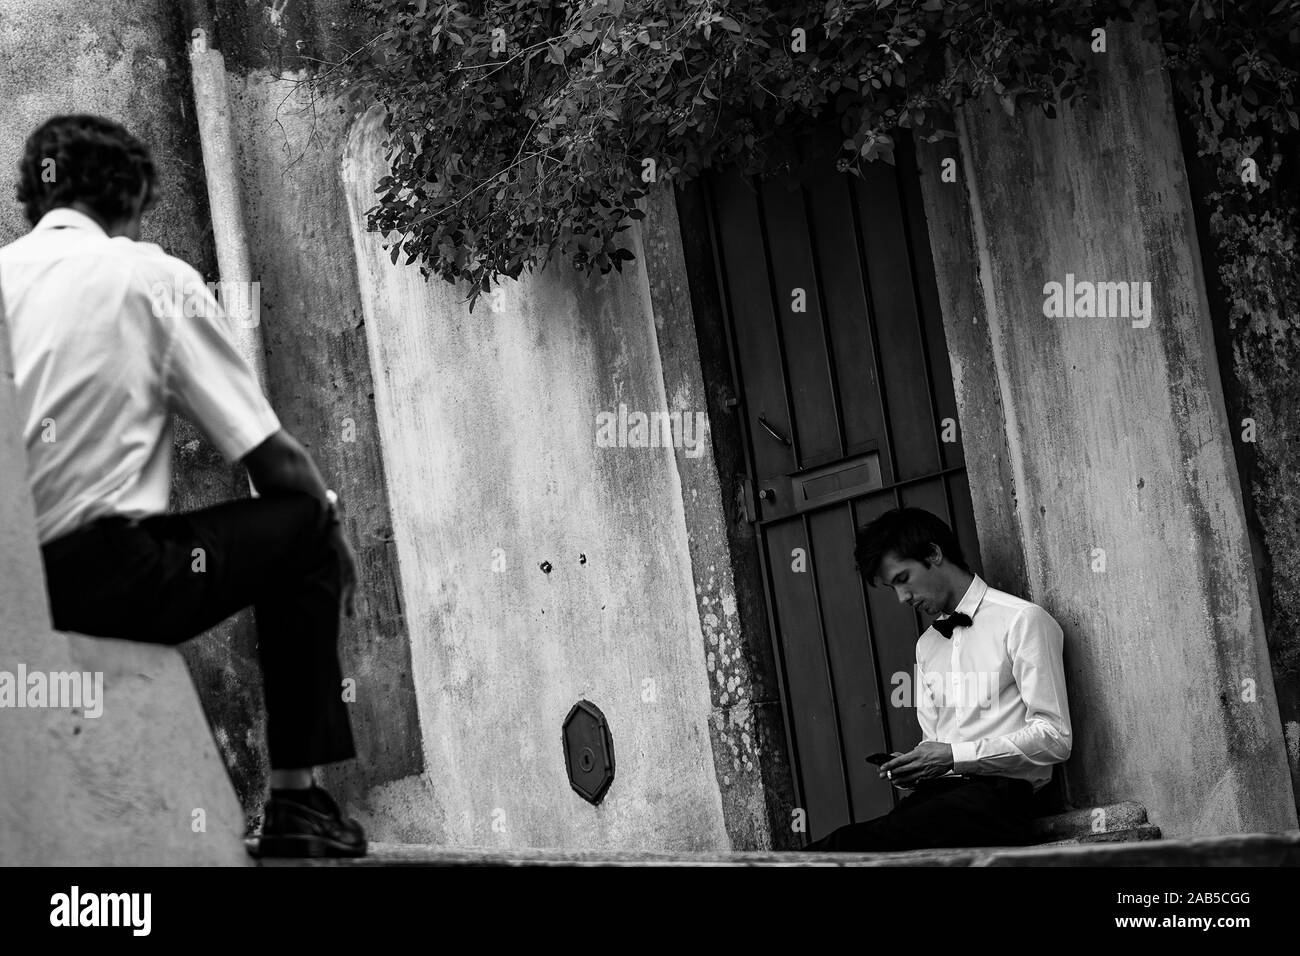 SINTRA, PORTUGAL - OCTOBER  31, 2017. Street photography with men relaxing on street , Sintra , Portugal. Stock Photo